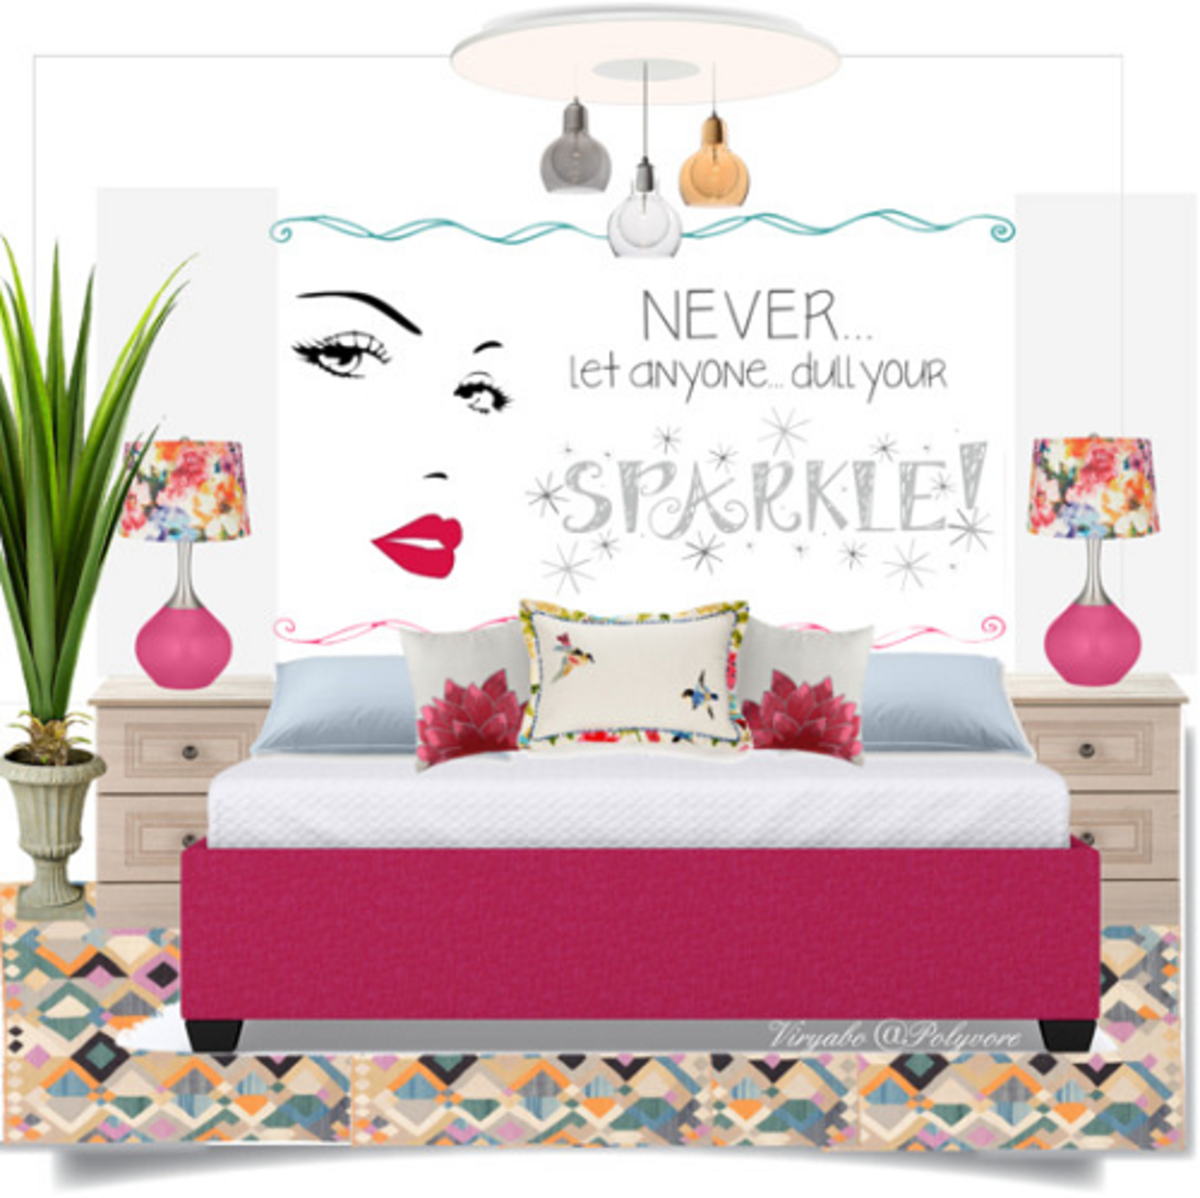 A creative faux headboard idea using wall decals. You can create any theme you desire to make the wall above your bed look stylish and impressive.